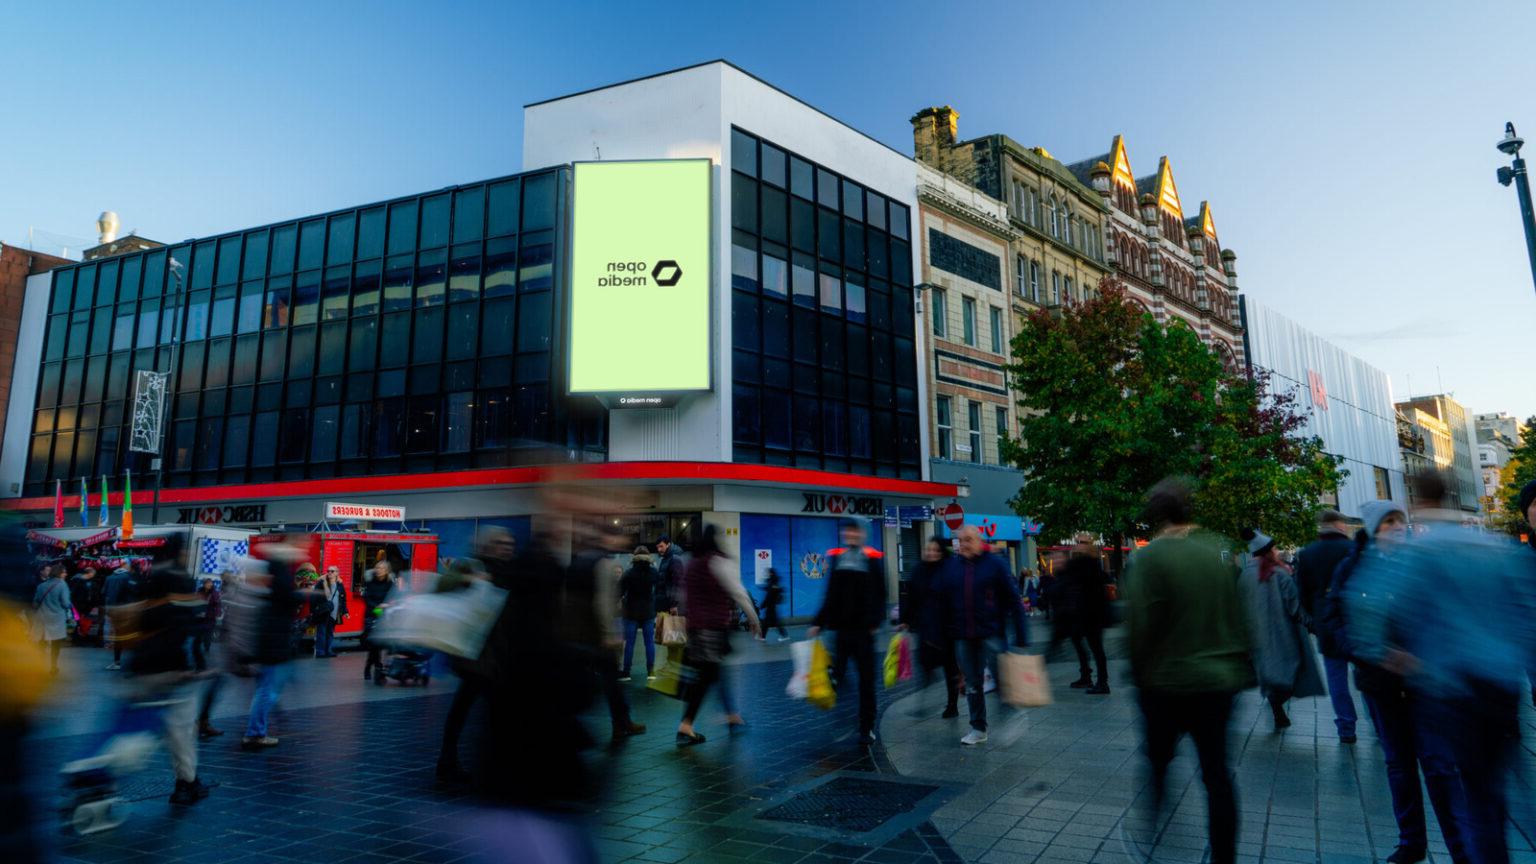 Open Media OOH screen in Liverpool One featuring new br和ing